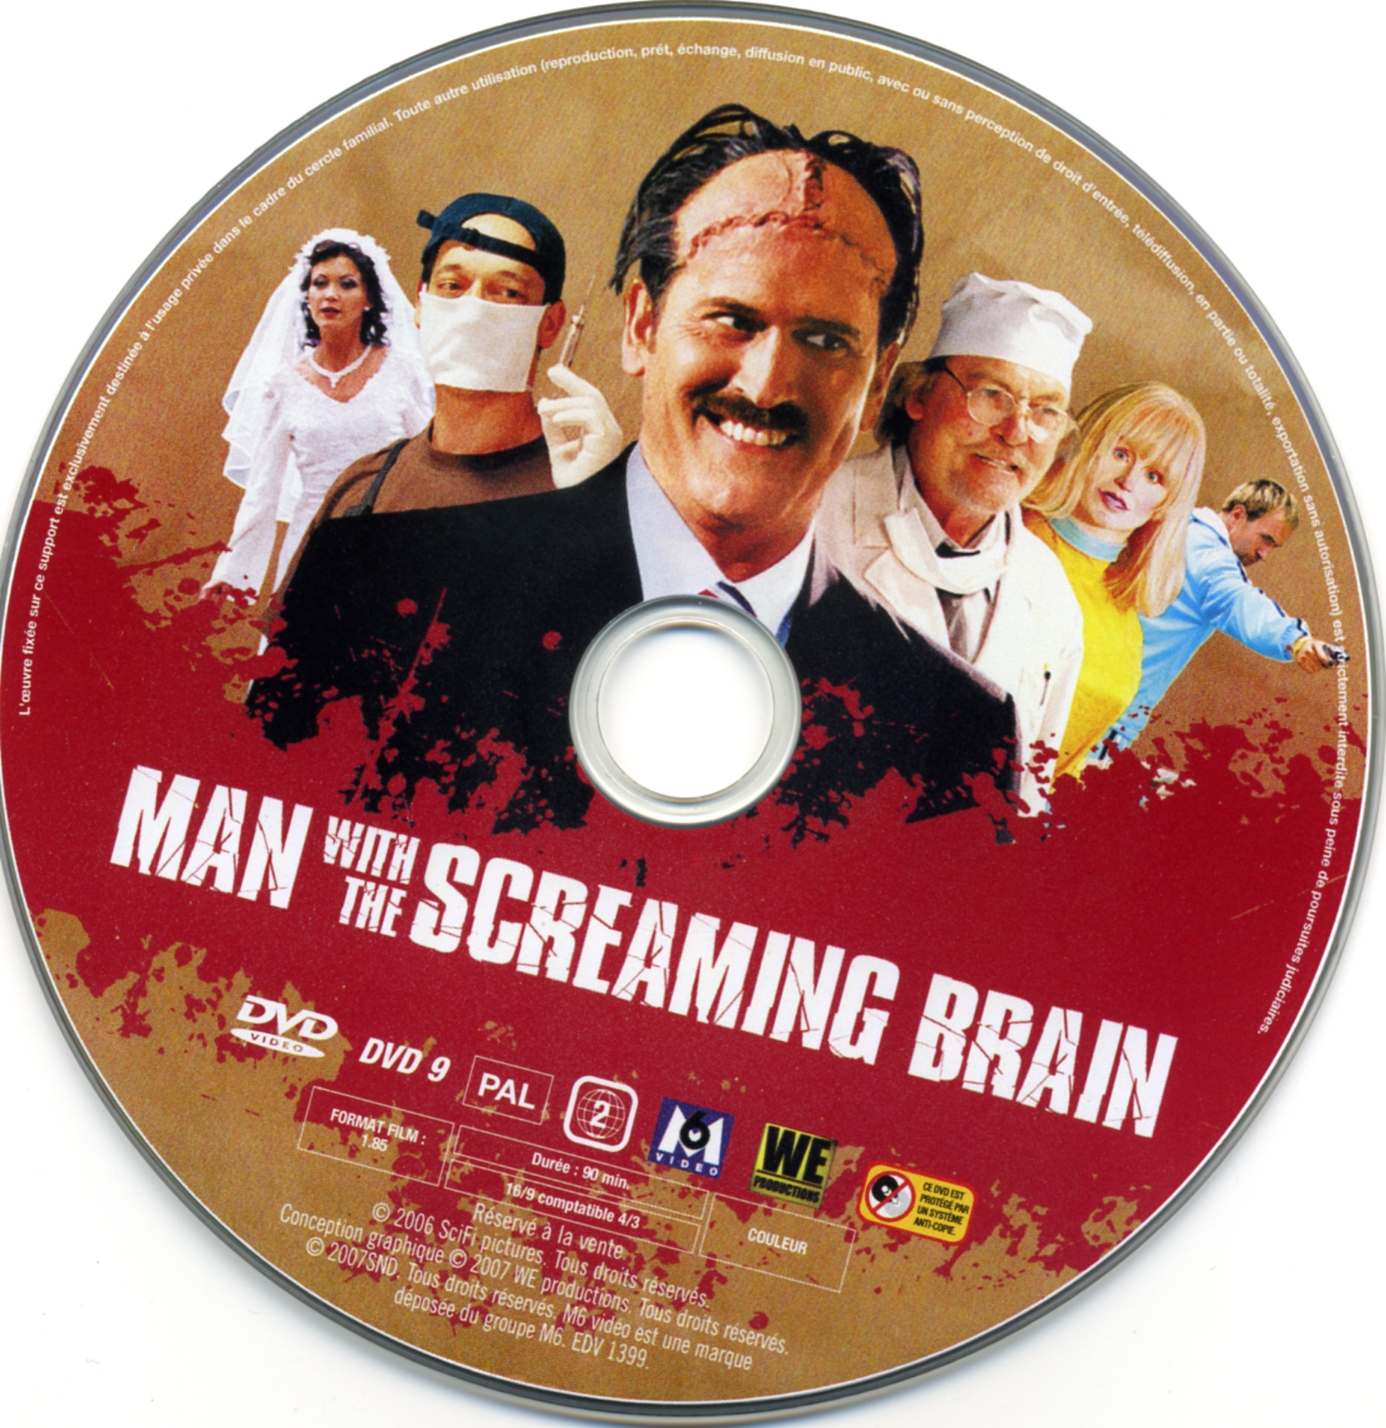 Man with a screaming brain